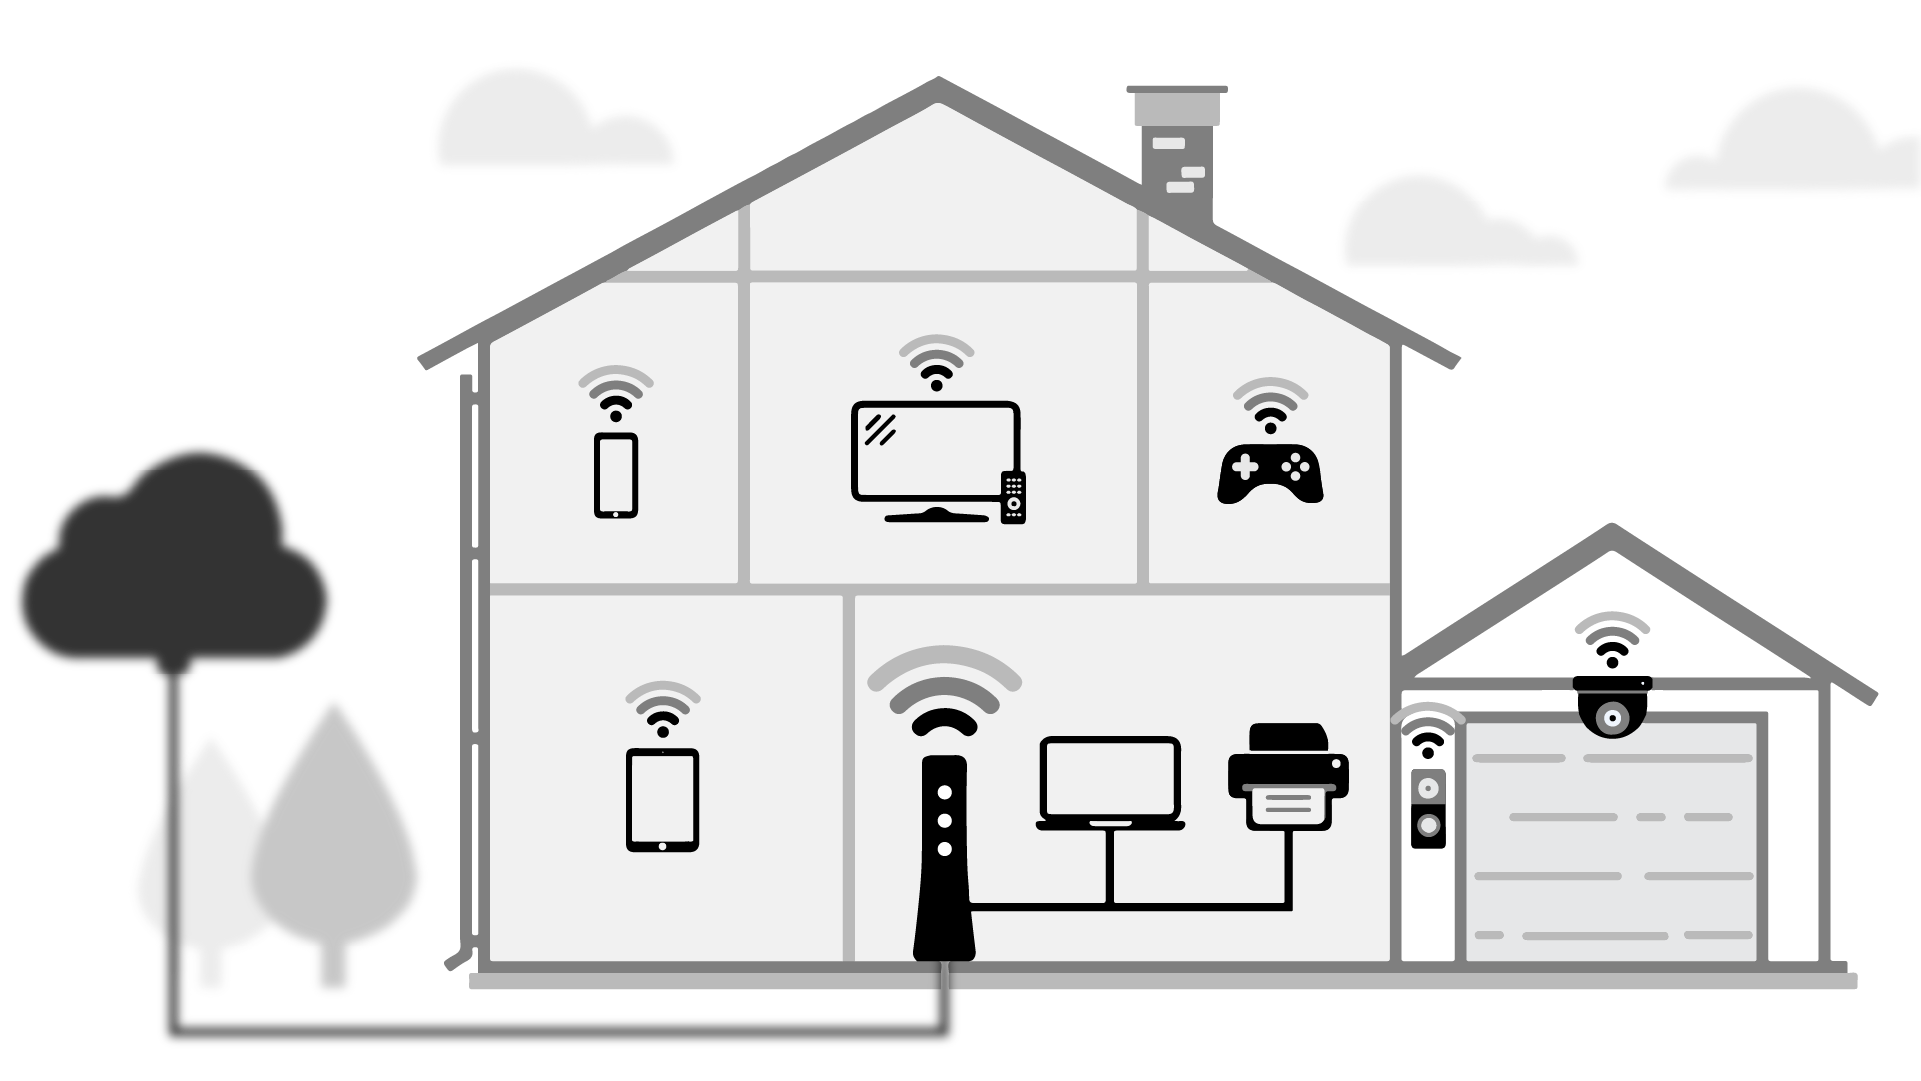 An illustrated diagram showing network speed from a WiFi-connected device to your other devices in your home